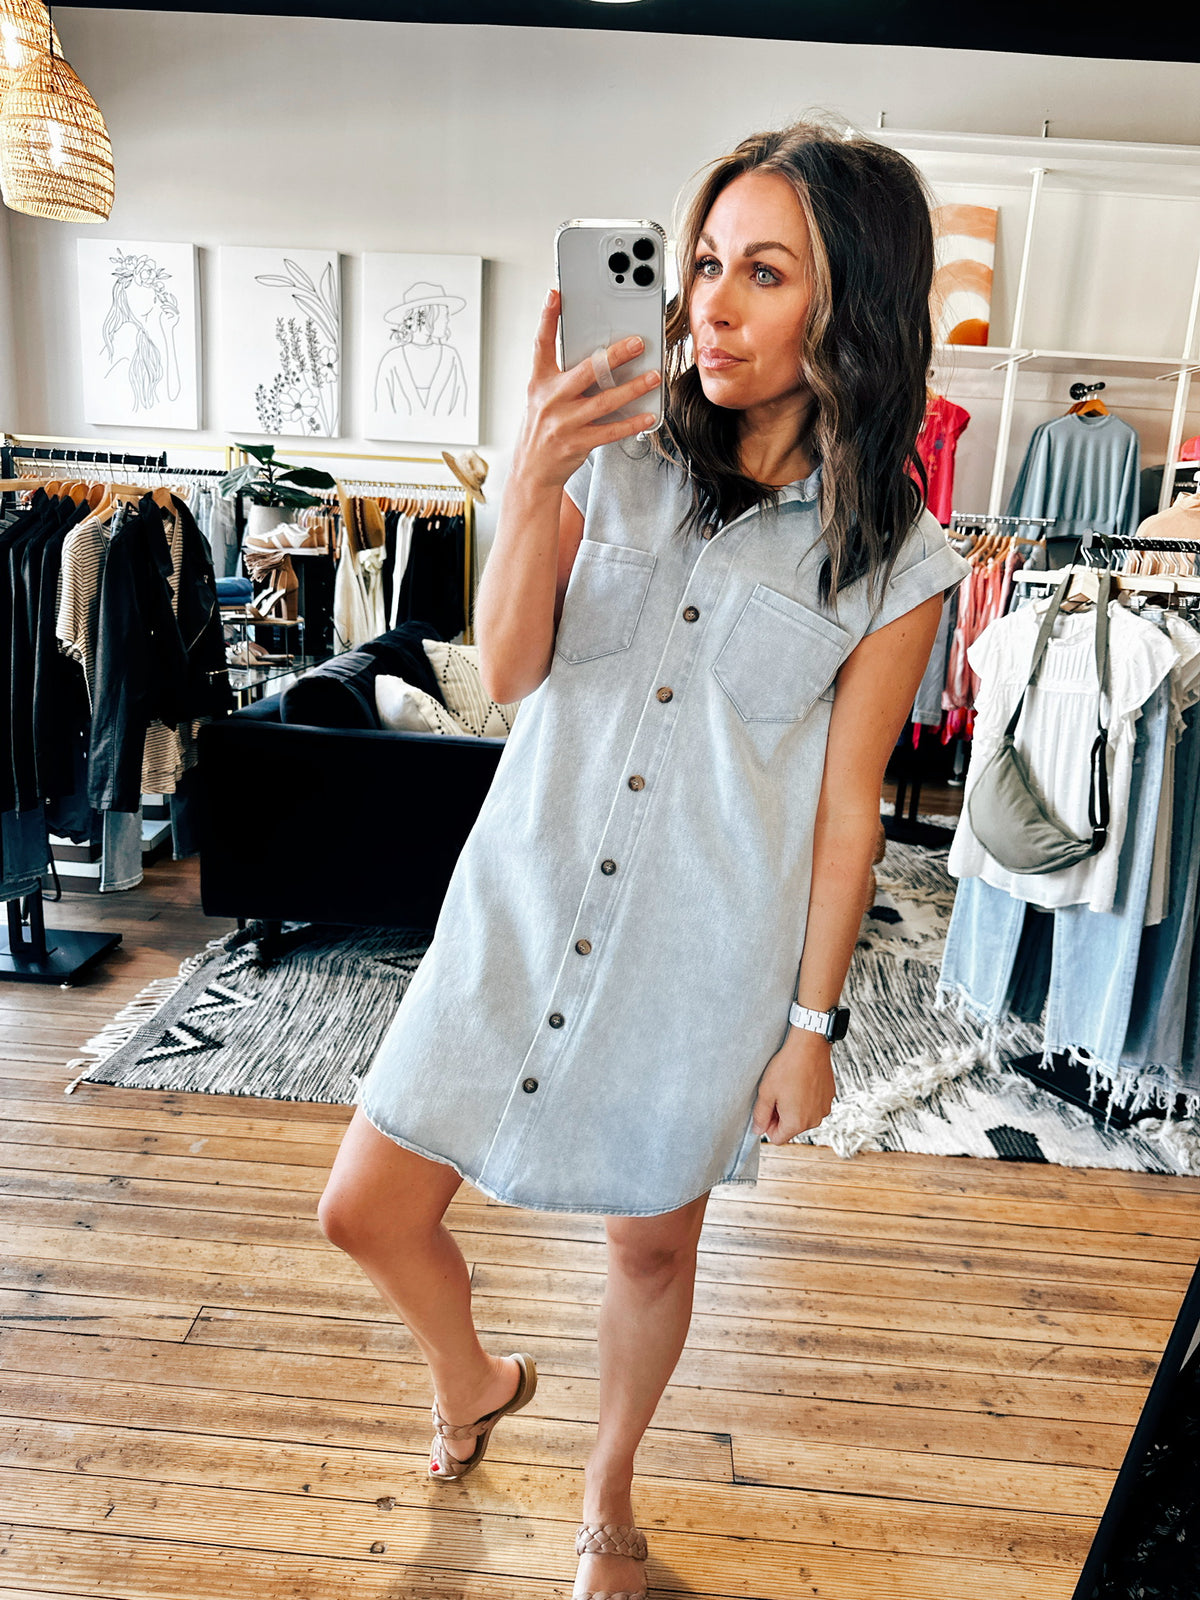 Tracy Denim Dress-Dresses & RompersWomen's Denim Dress | VerClare Boutique | Chenoa, IL-Women's Denim Dress! This dress fits true to size and is light wash olive denim, Available in S, M, L. Fabric Content: 100% Cotton. Shop at VerClare Boutique, Located in Chenoa, IL about 20 minutes outside of Bloomington & Normal, IL in McLean County. Free Shipping on eligible Orders. Shop Pay Accepted.-VerClare Boutique